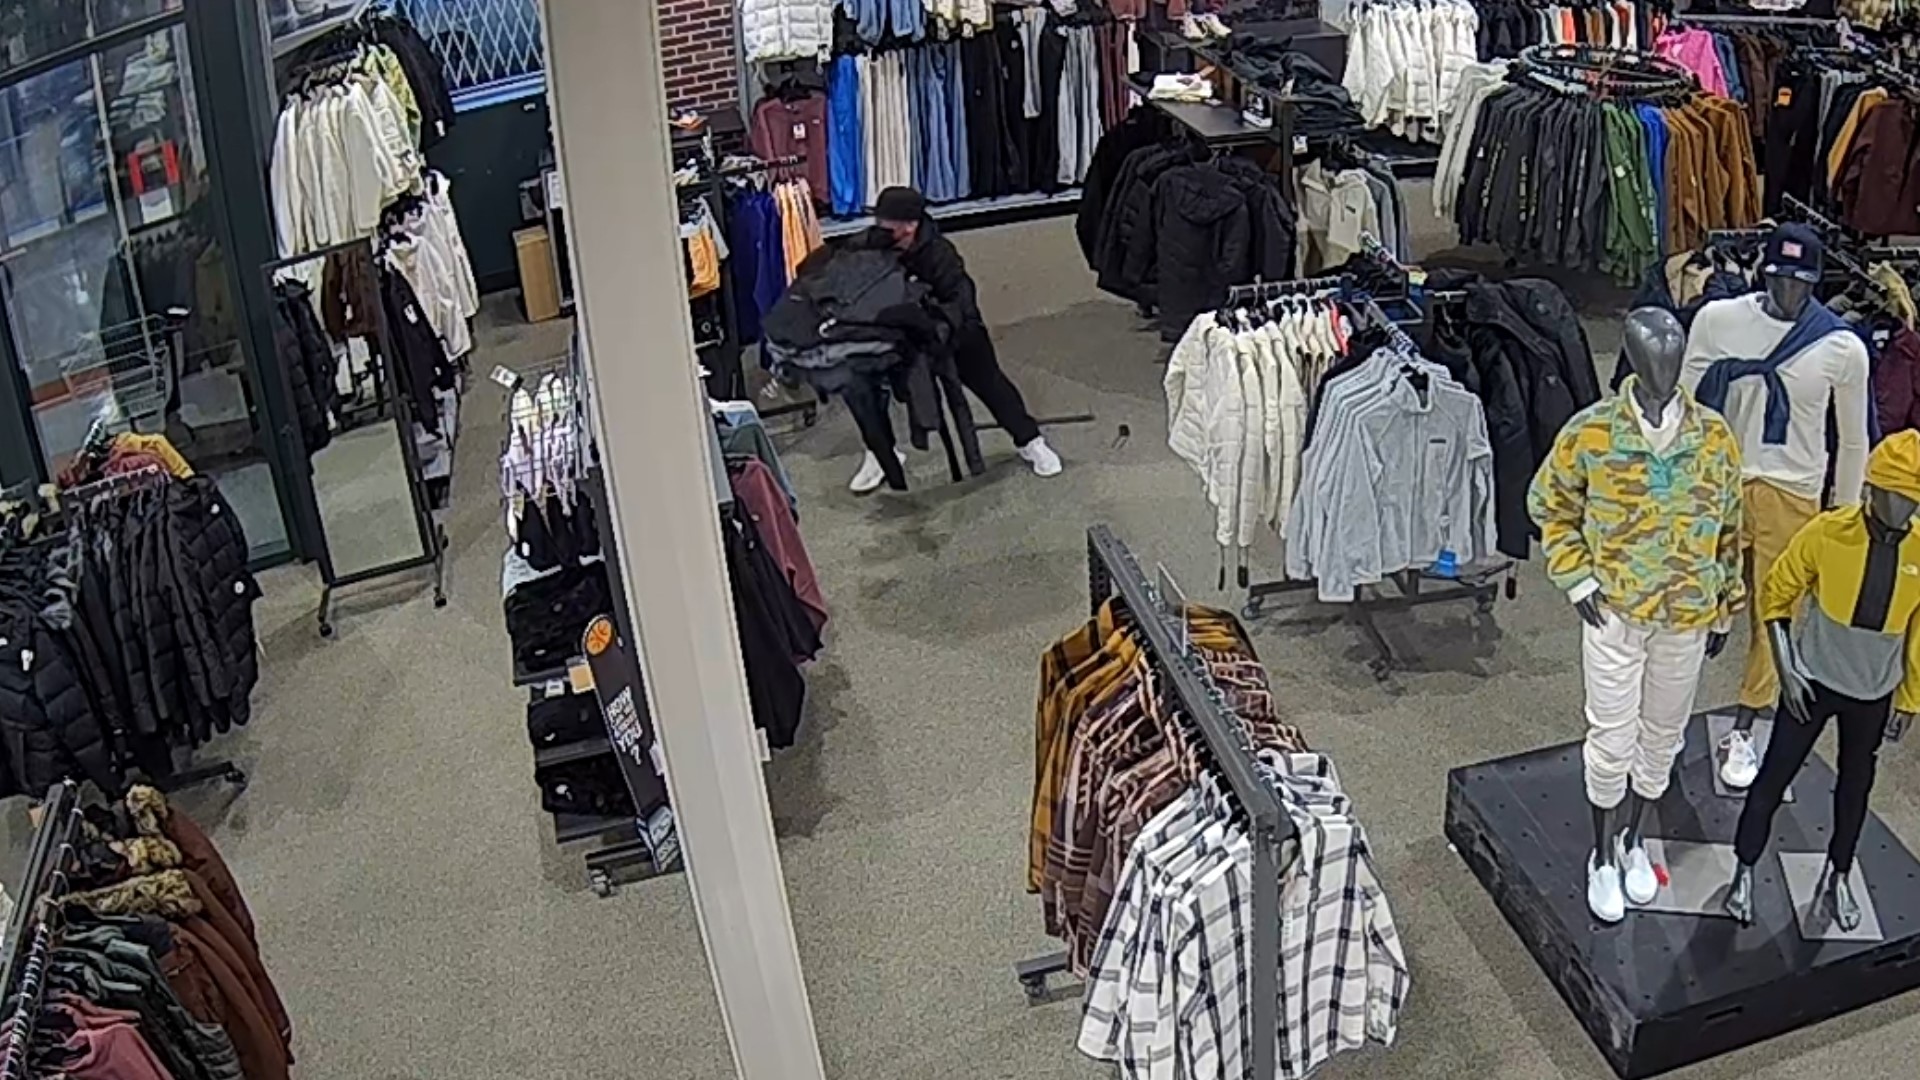 Security cameras show Martin Castaway stealing merchandise from Dick's Sporting Goods on more than one occasion.